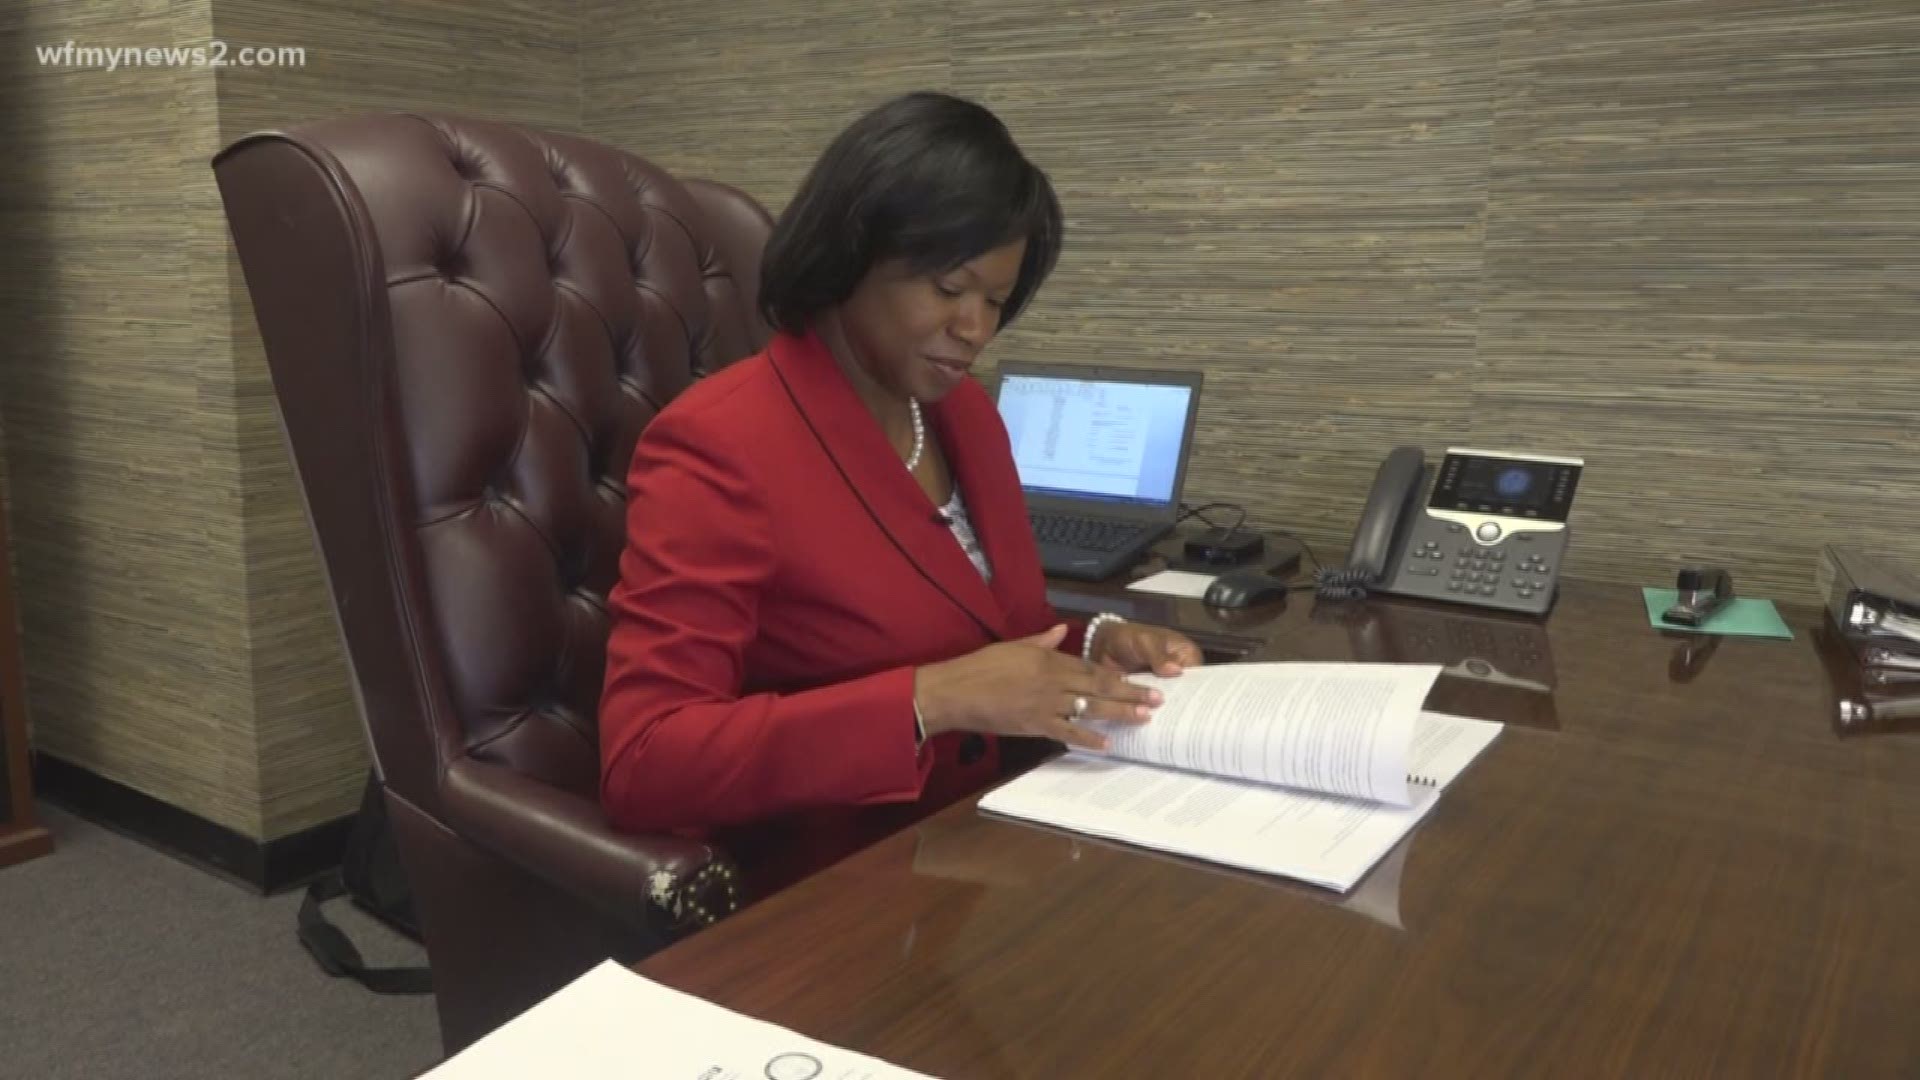 Guilford County's First African American and first female District attorney was sworn in Wednesday afternoon.